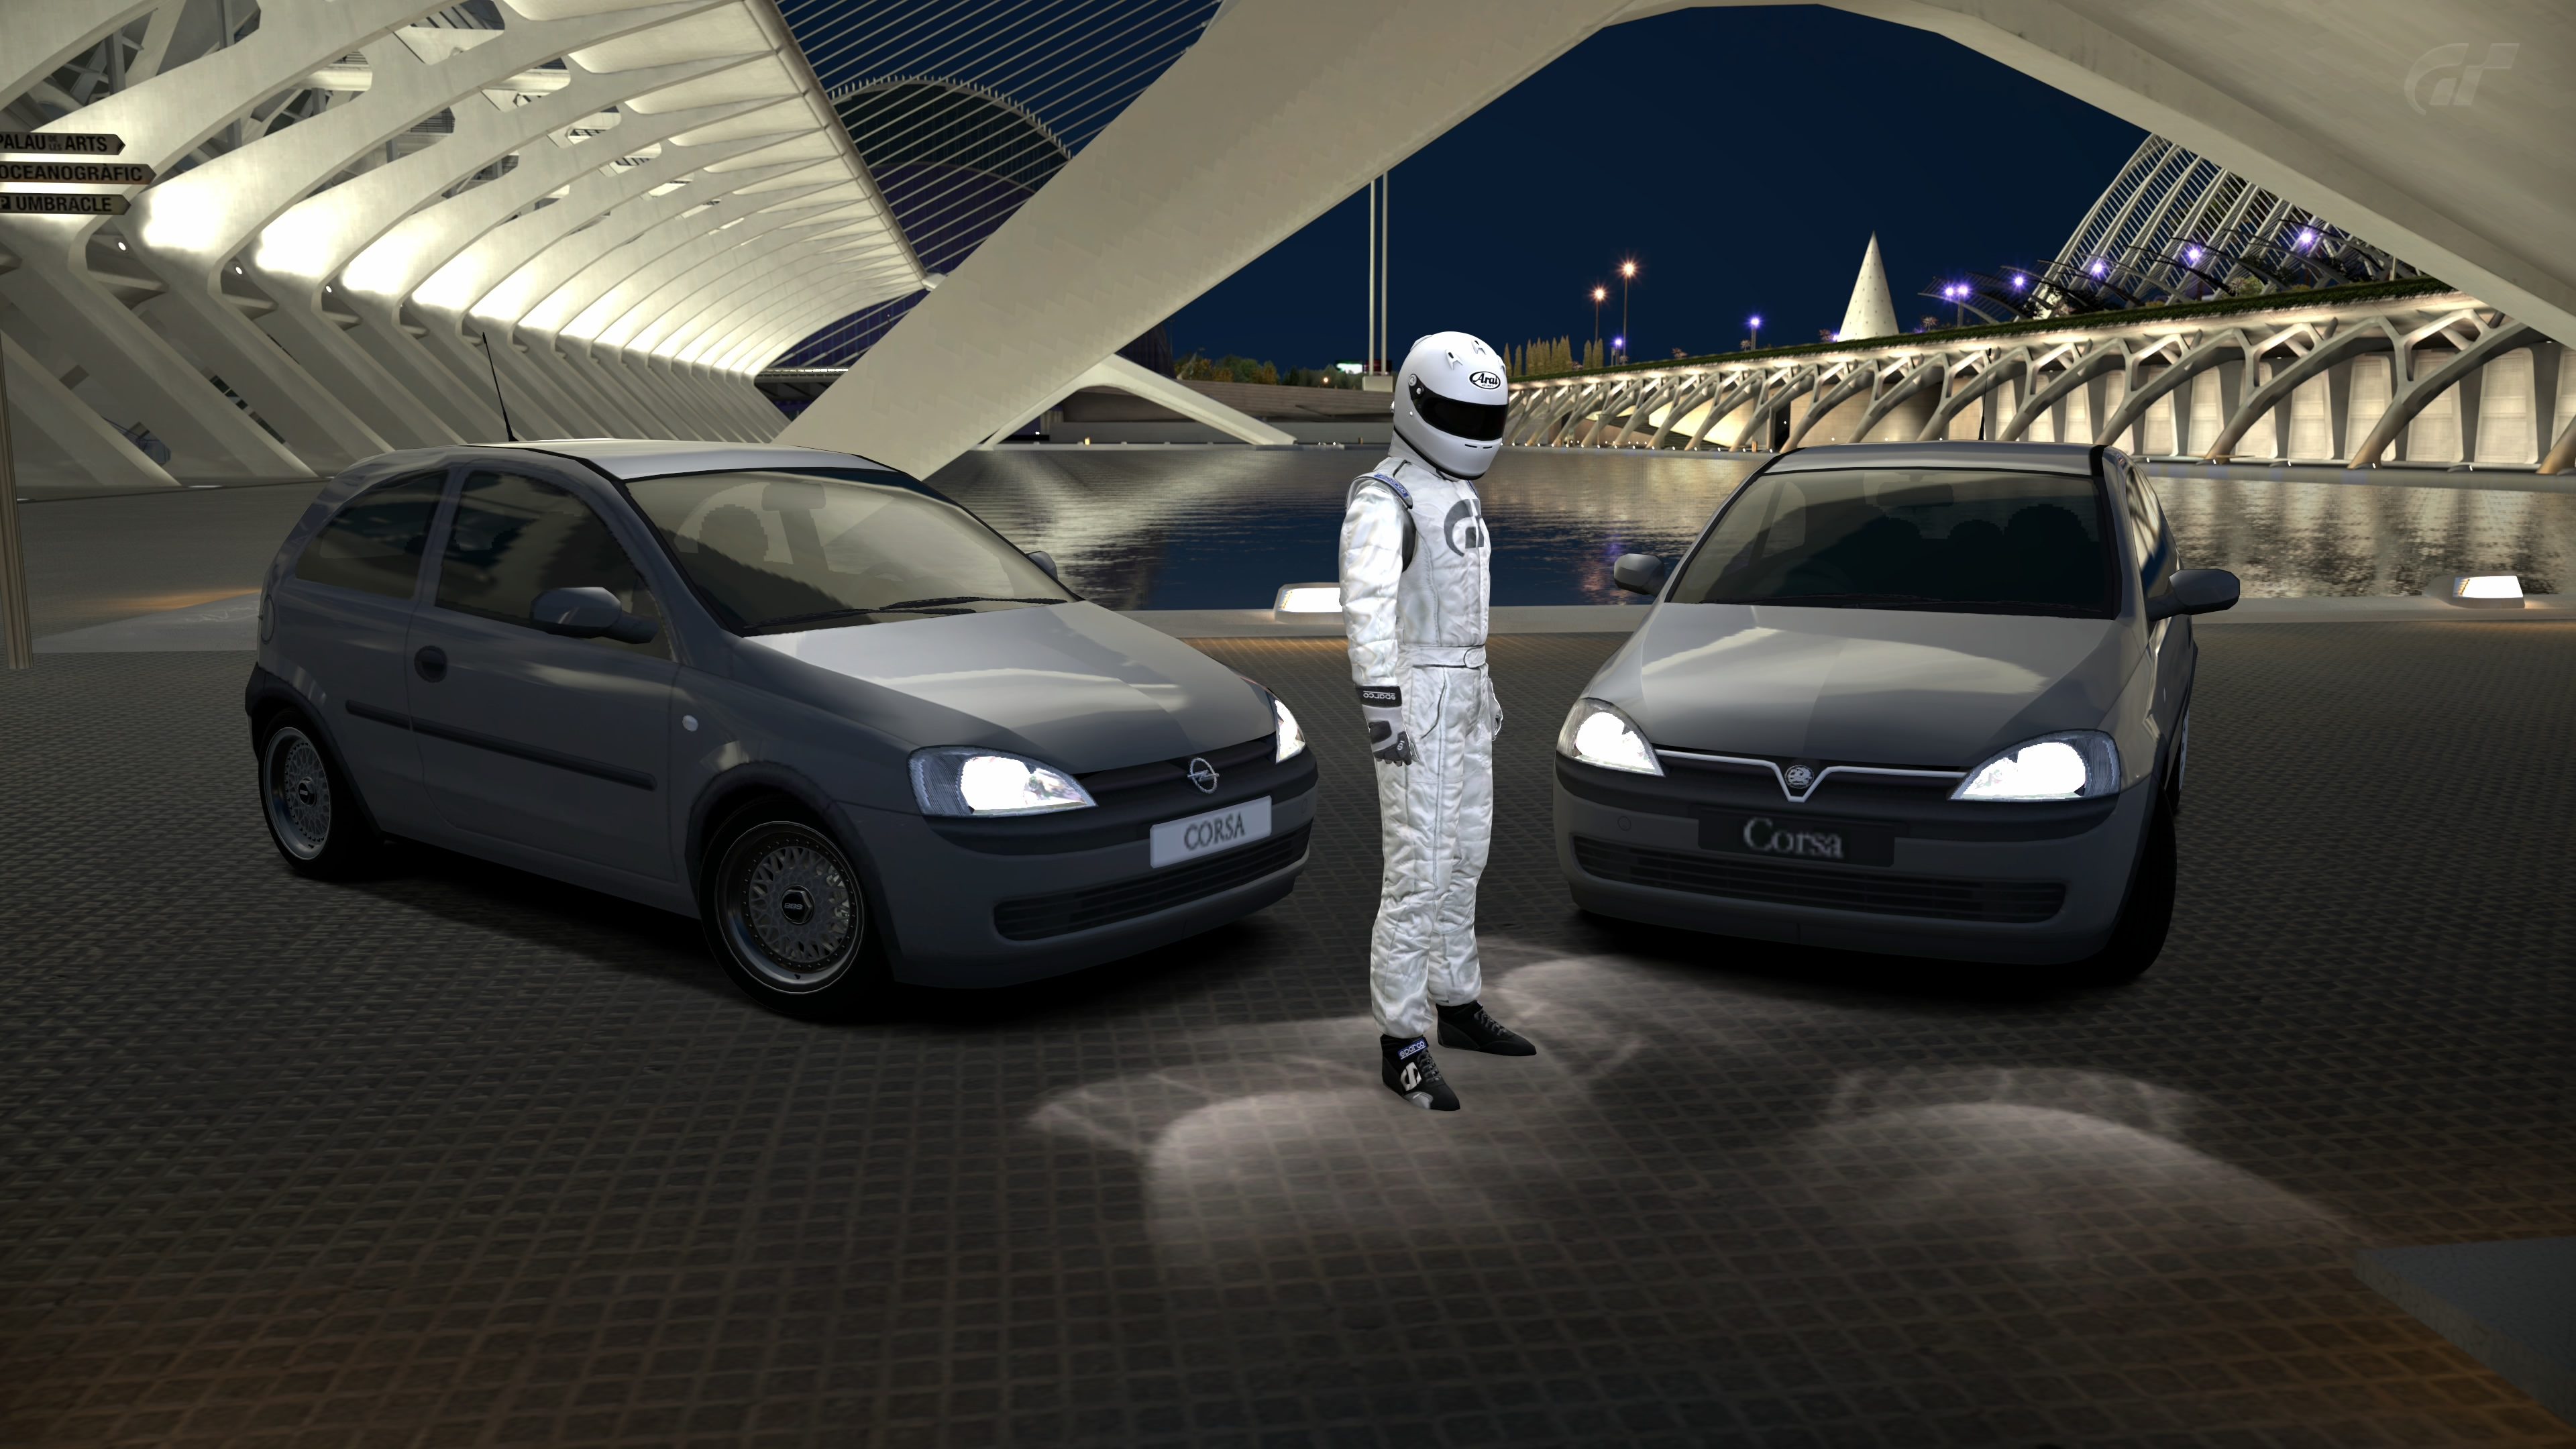 Vauxhall Vs Opel Corsa at City Of Arts And Sciences